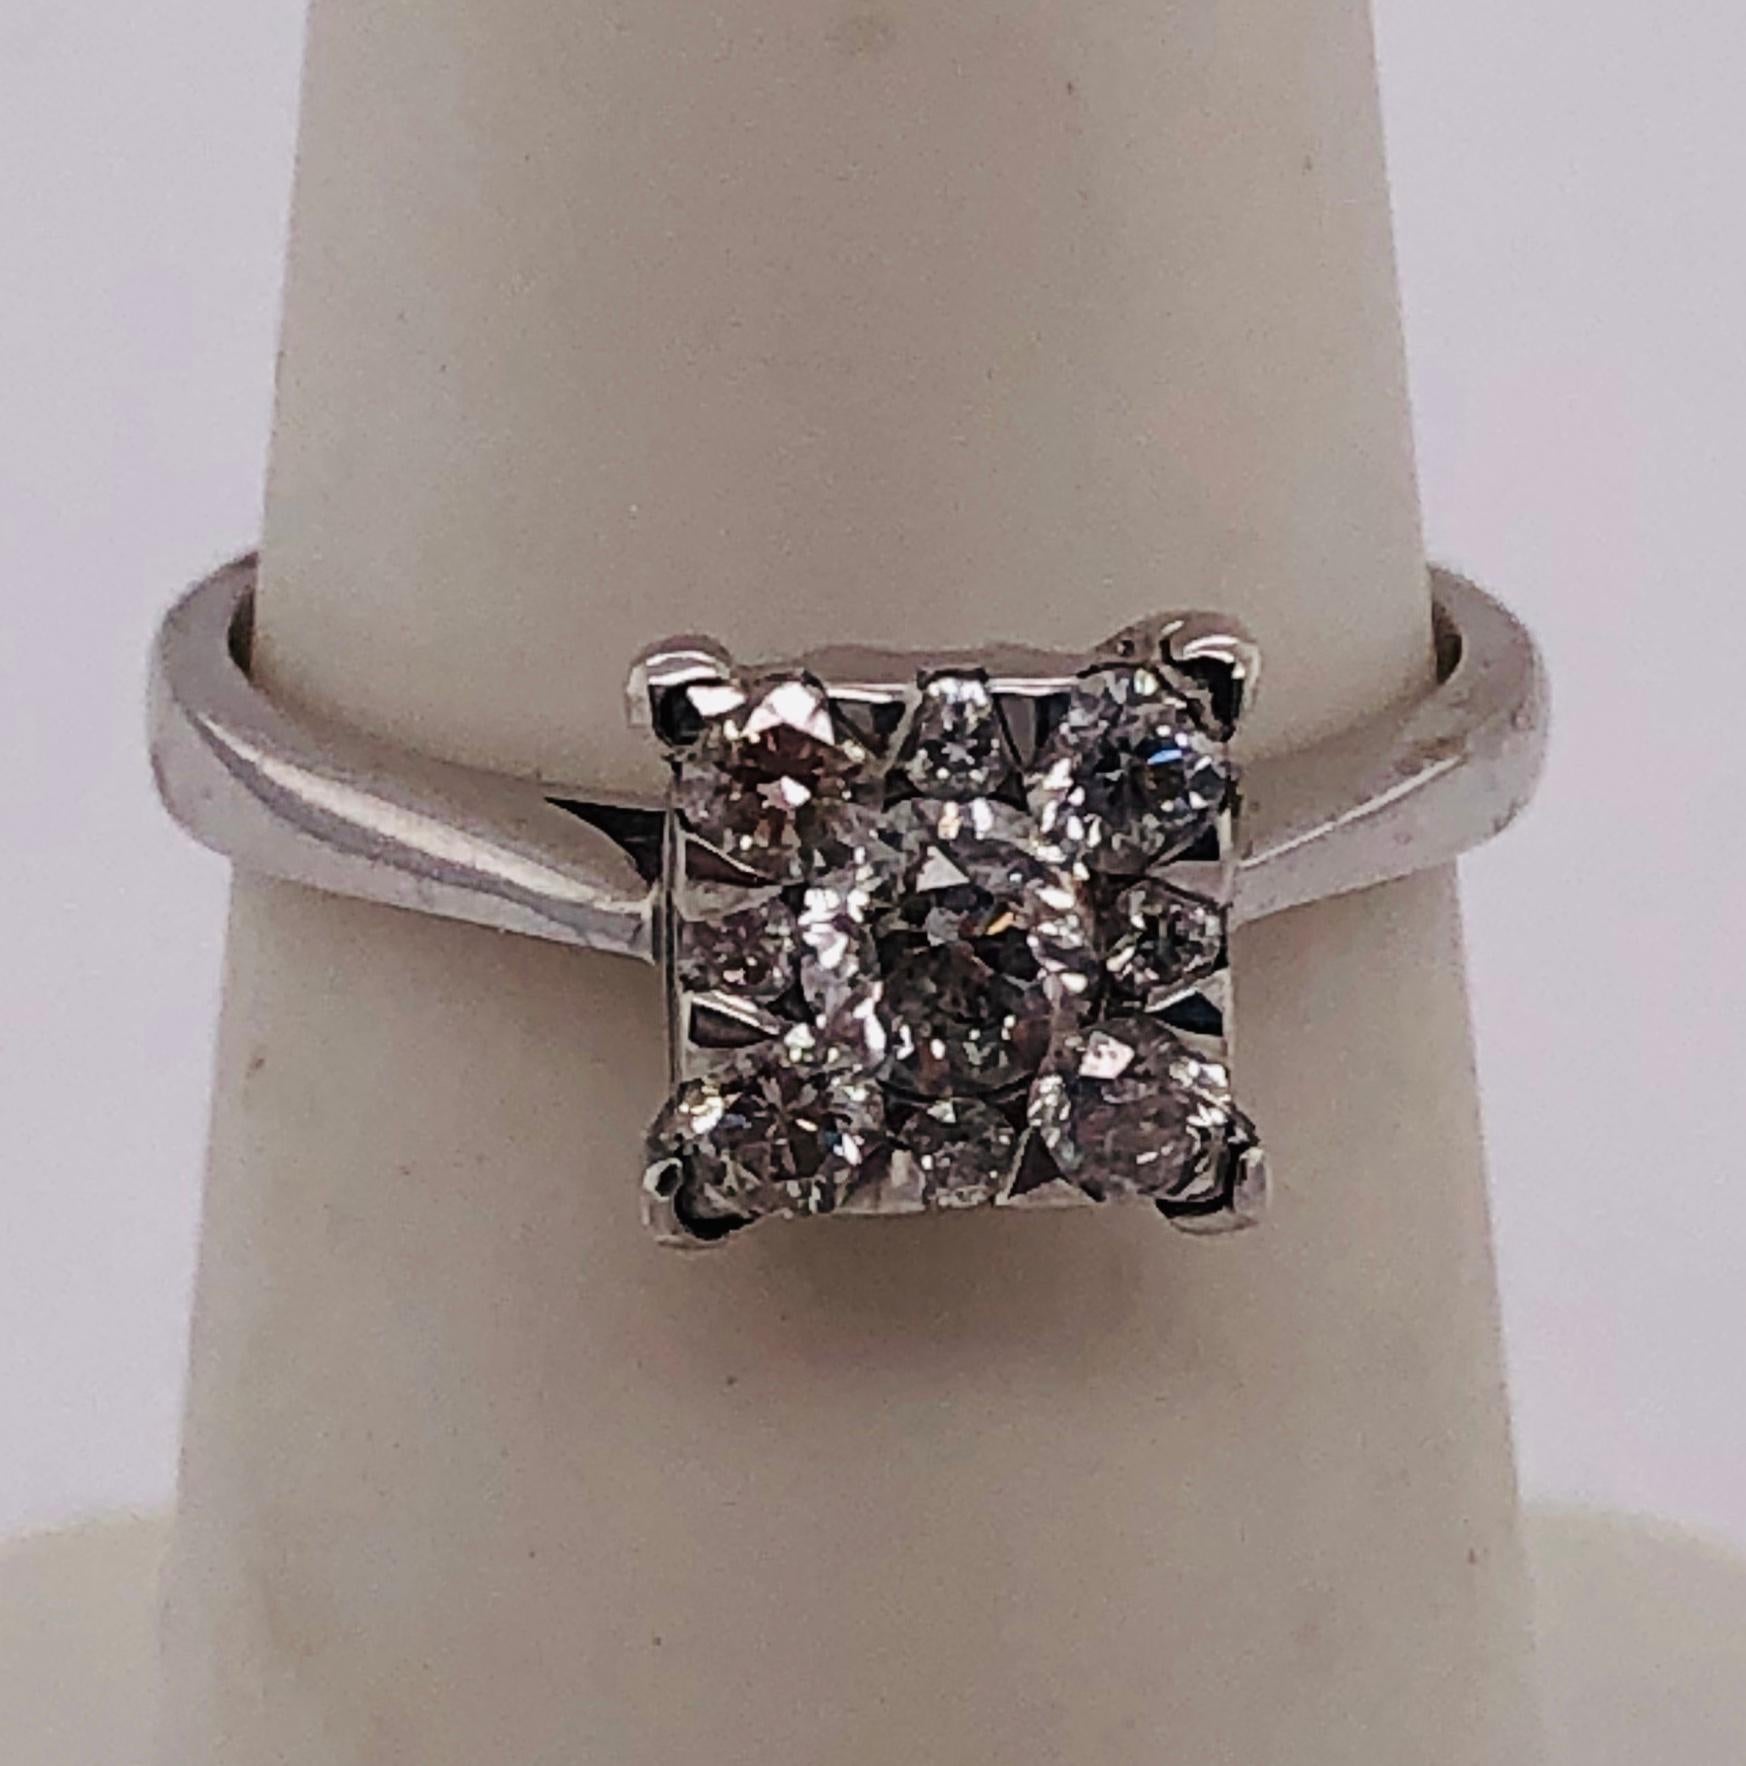 14 Kt White Gold Engagement Bridal Ring with Diamonds 0.67 Total Diamond Weight
Size 5.5
2.65 grams Total weight
